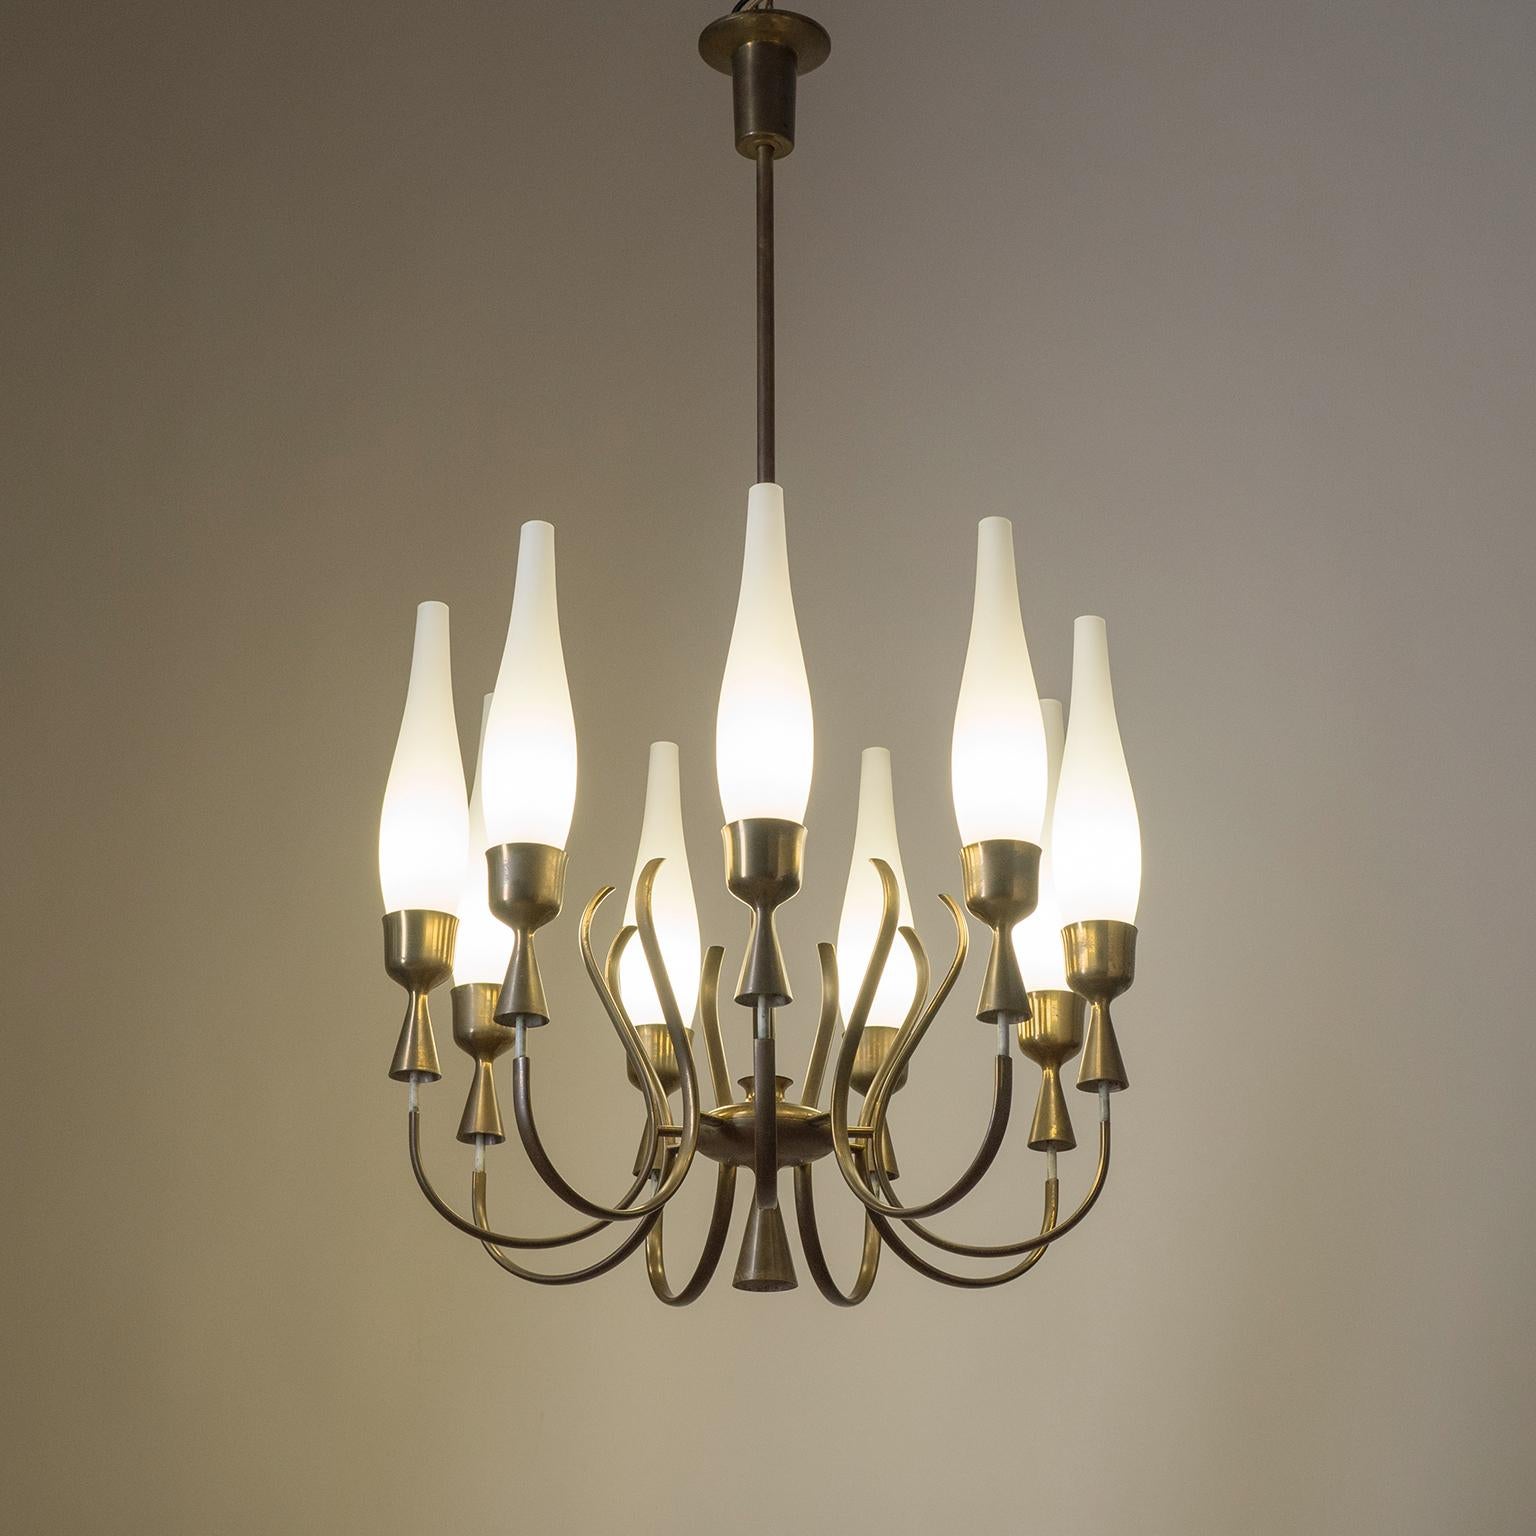 Mid-Century Modern Angelo Lelii Chandelier, 1957, Satin Glass and Brass